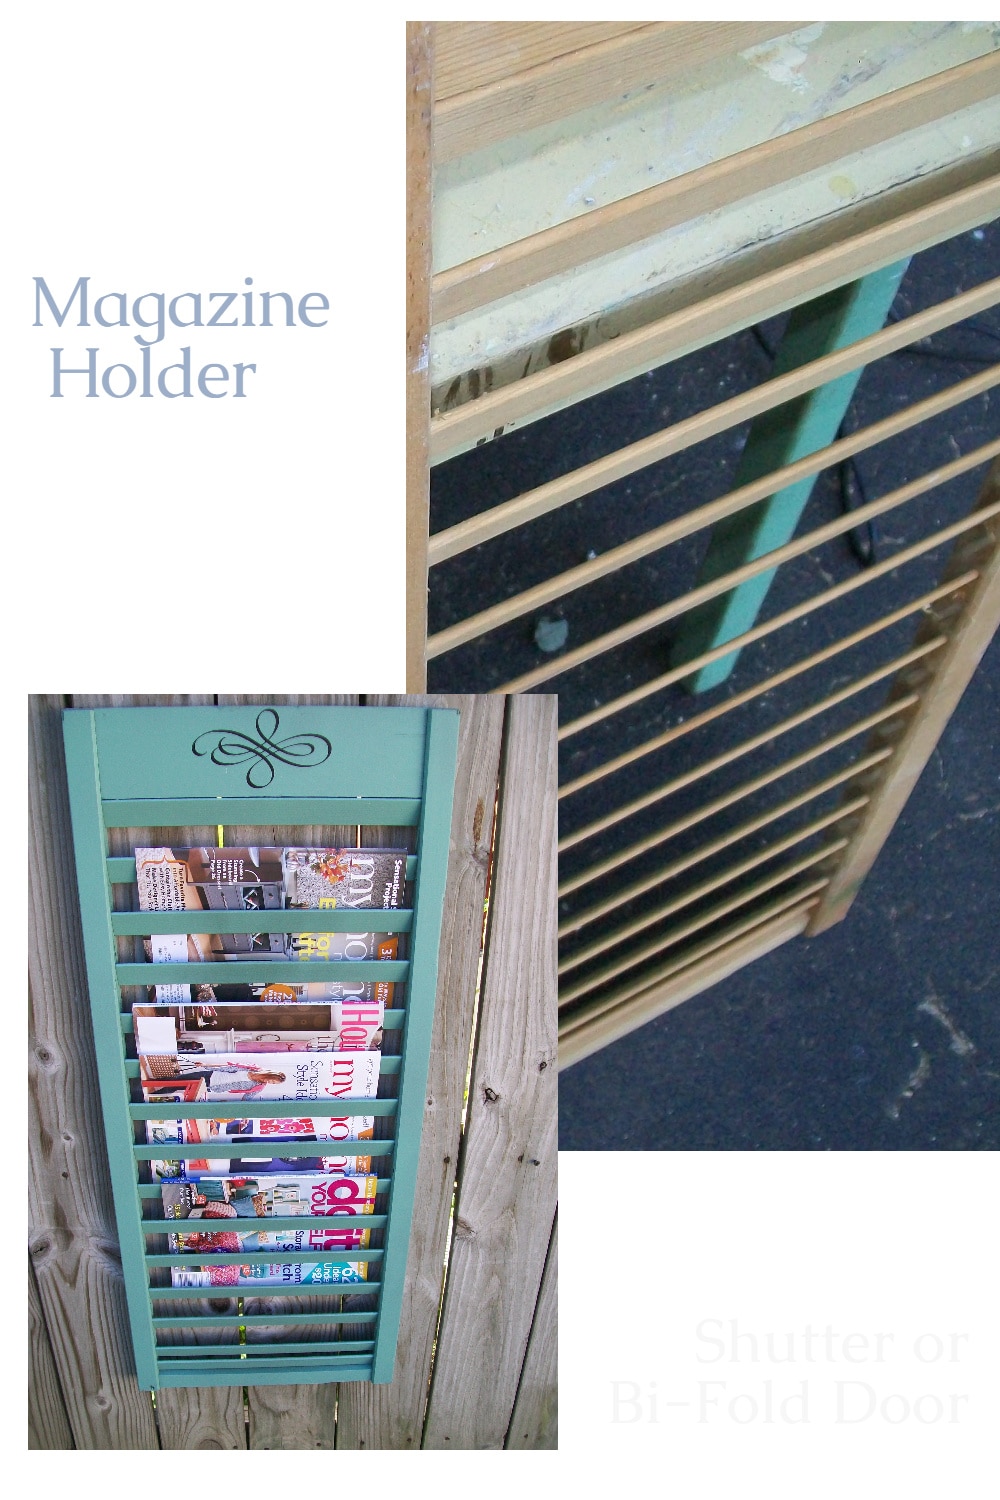 Easy repurposed shutter project uses part of a bi-fold door with every other slat removed to make a shutter magazine rack. Fun idea to keep you organized. Step by step directions with great tips on removing slats! #MyRepurposedLife #repurposed #upcycle #shutter via @repurposedlife